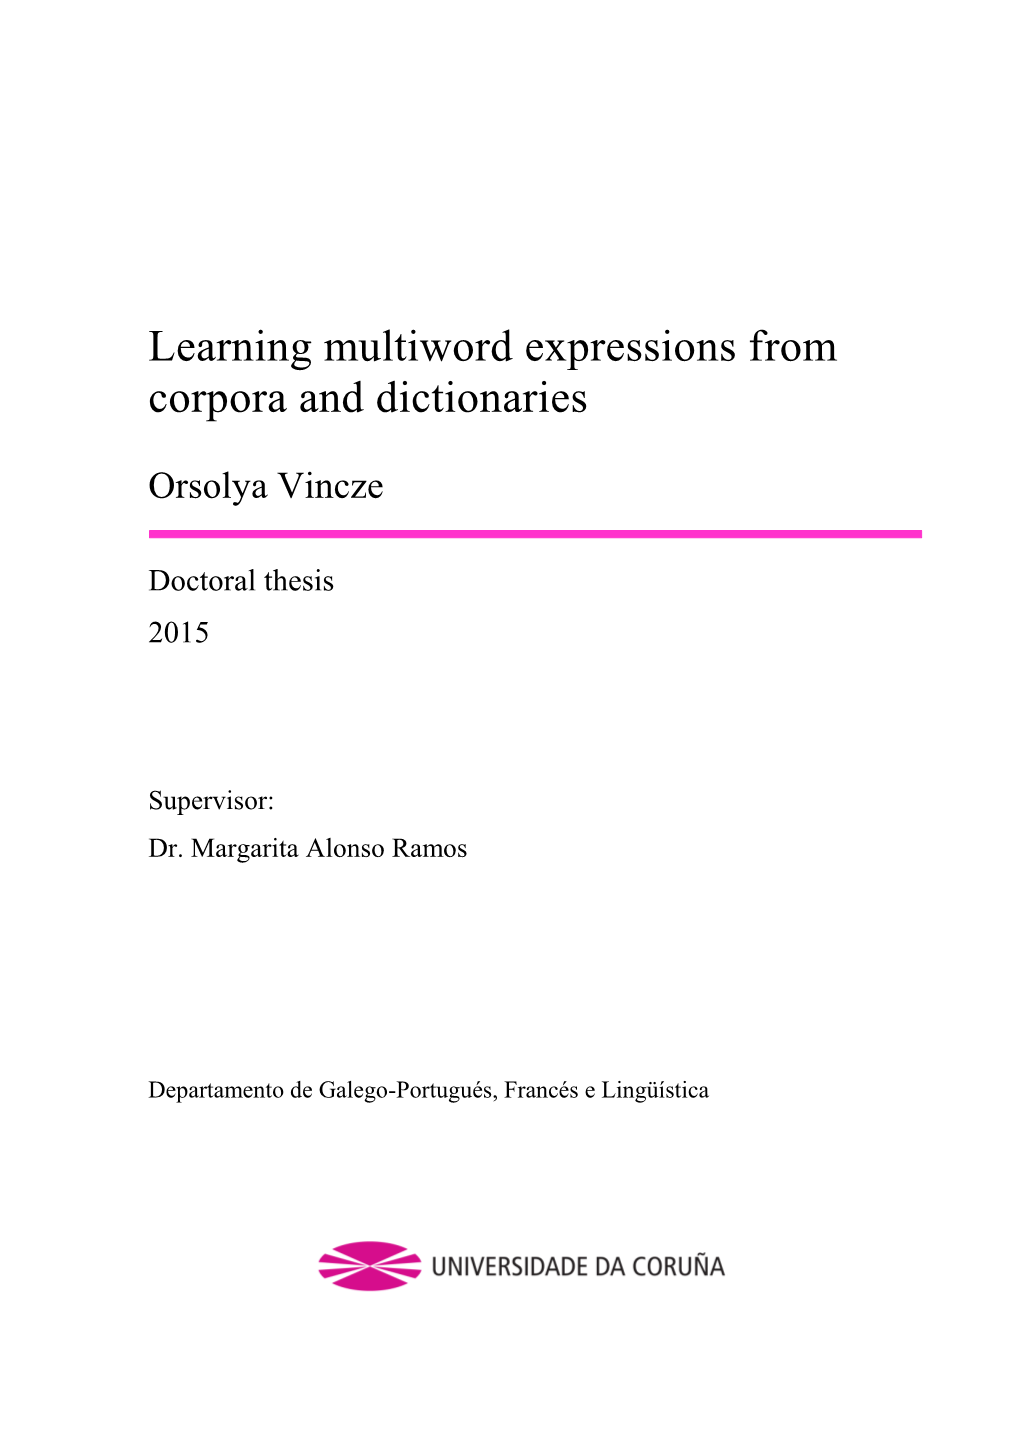 Learning Multiword Expressions from Corpora and Dictionaries